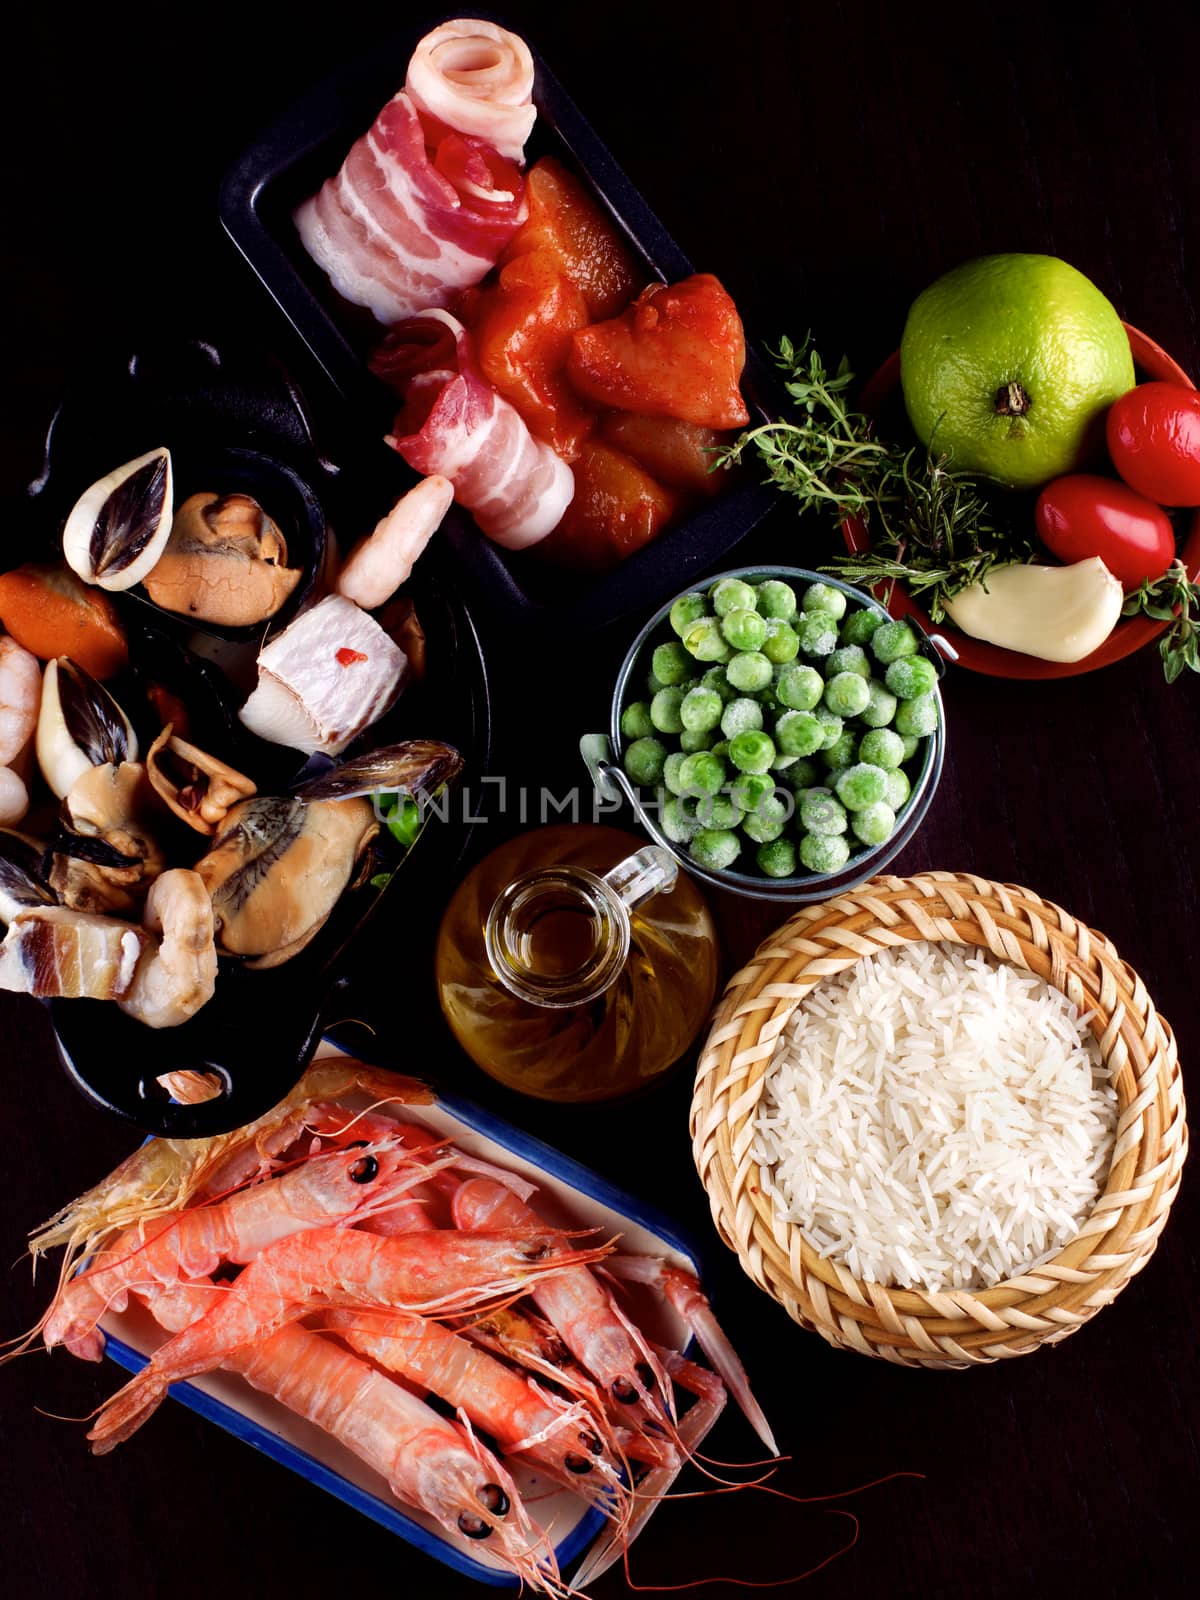 Arrangement of Raw Ingredients of Spanish Traditional Paella with Various Seafood, Mussels, Vegetables, Rice and Olive Oil closeup on Dark Wooden background. Top View